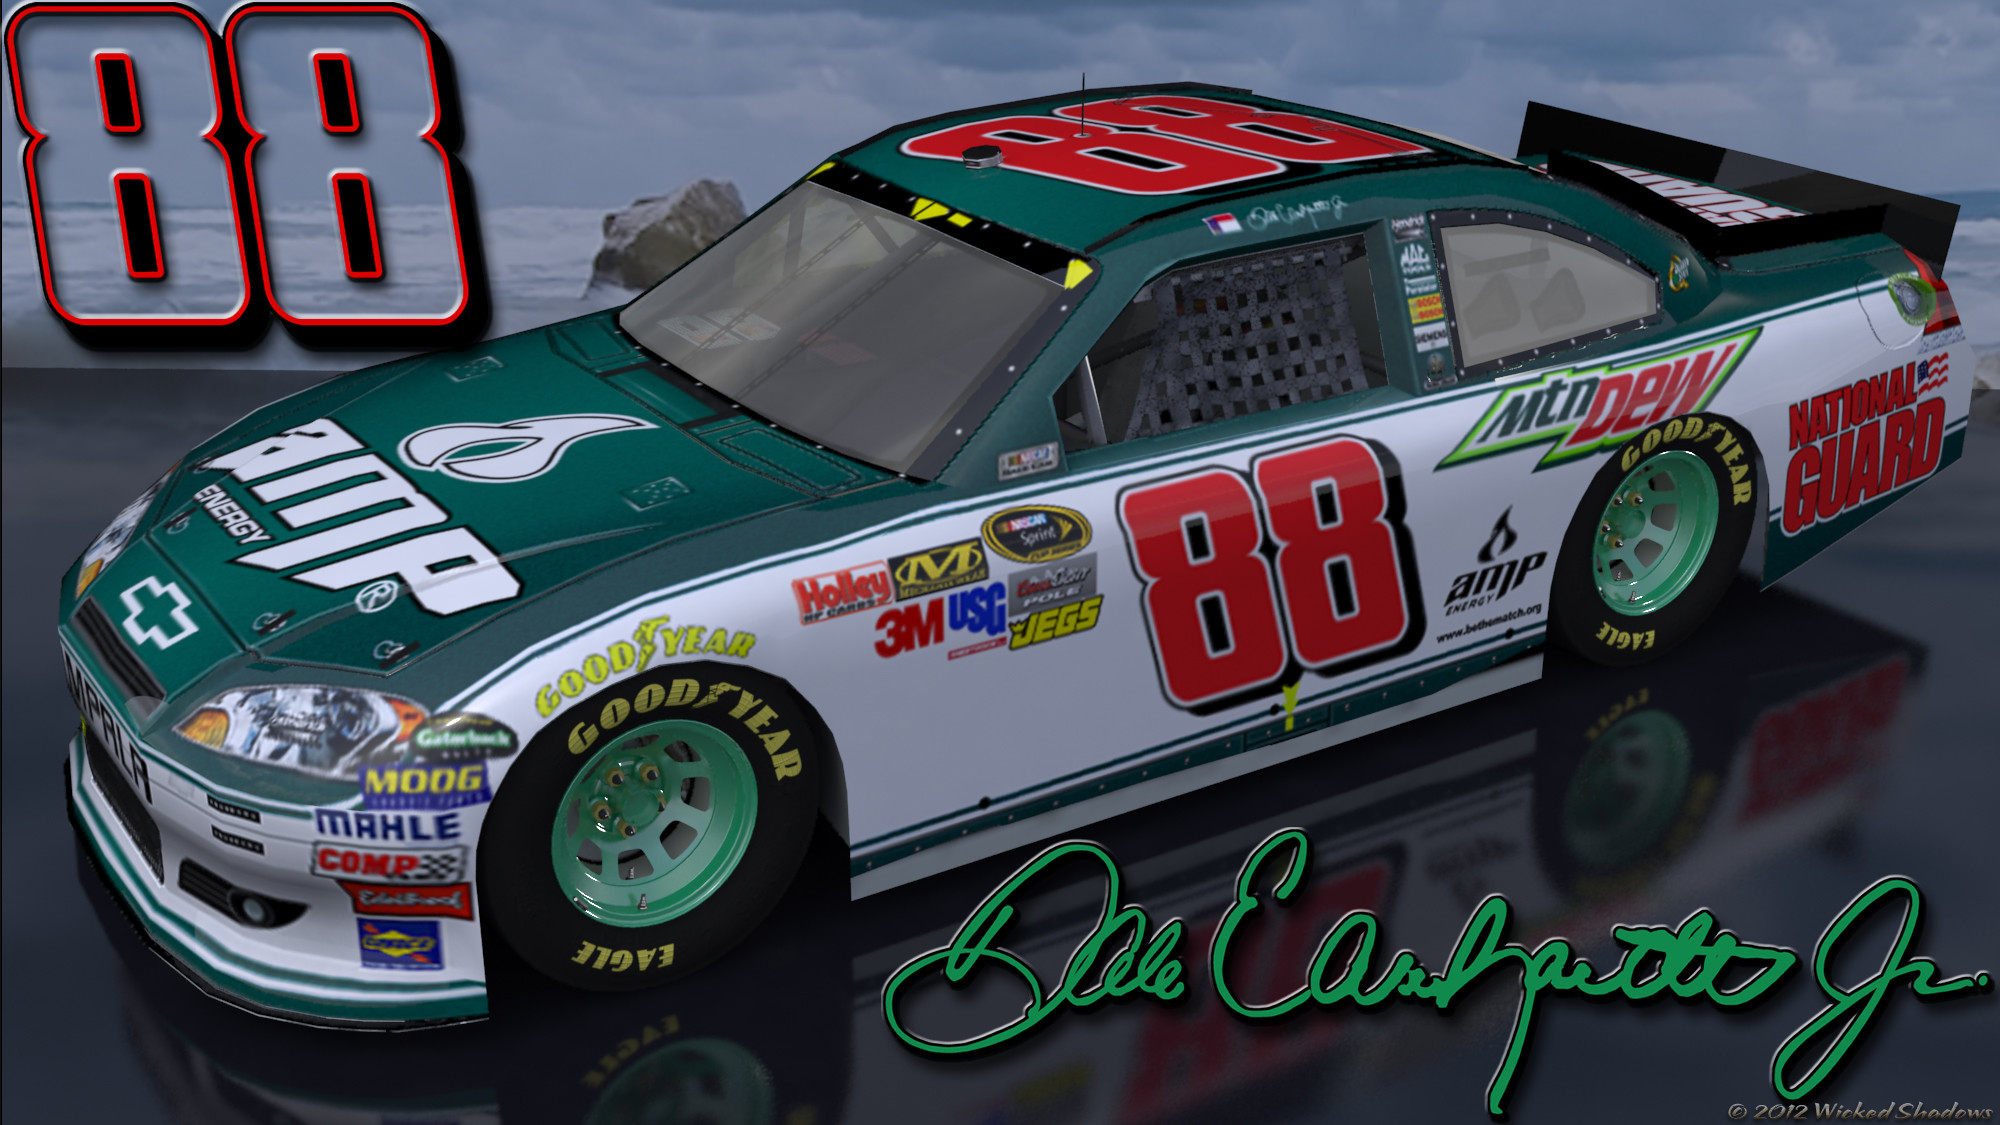 2000x1125 Wallpapers By Wicked Shadows: Dale Earnhardt Jr Amp Green 1 Outdoors .